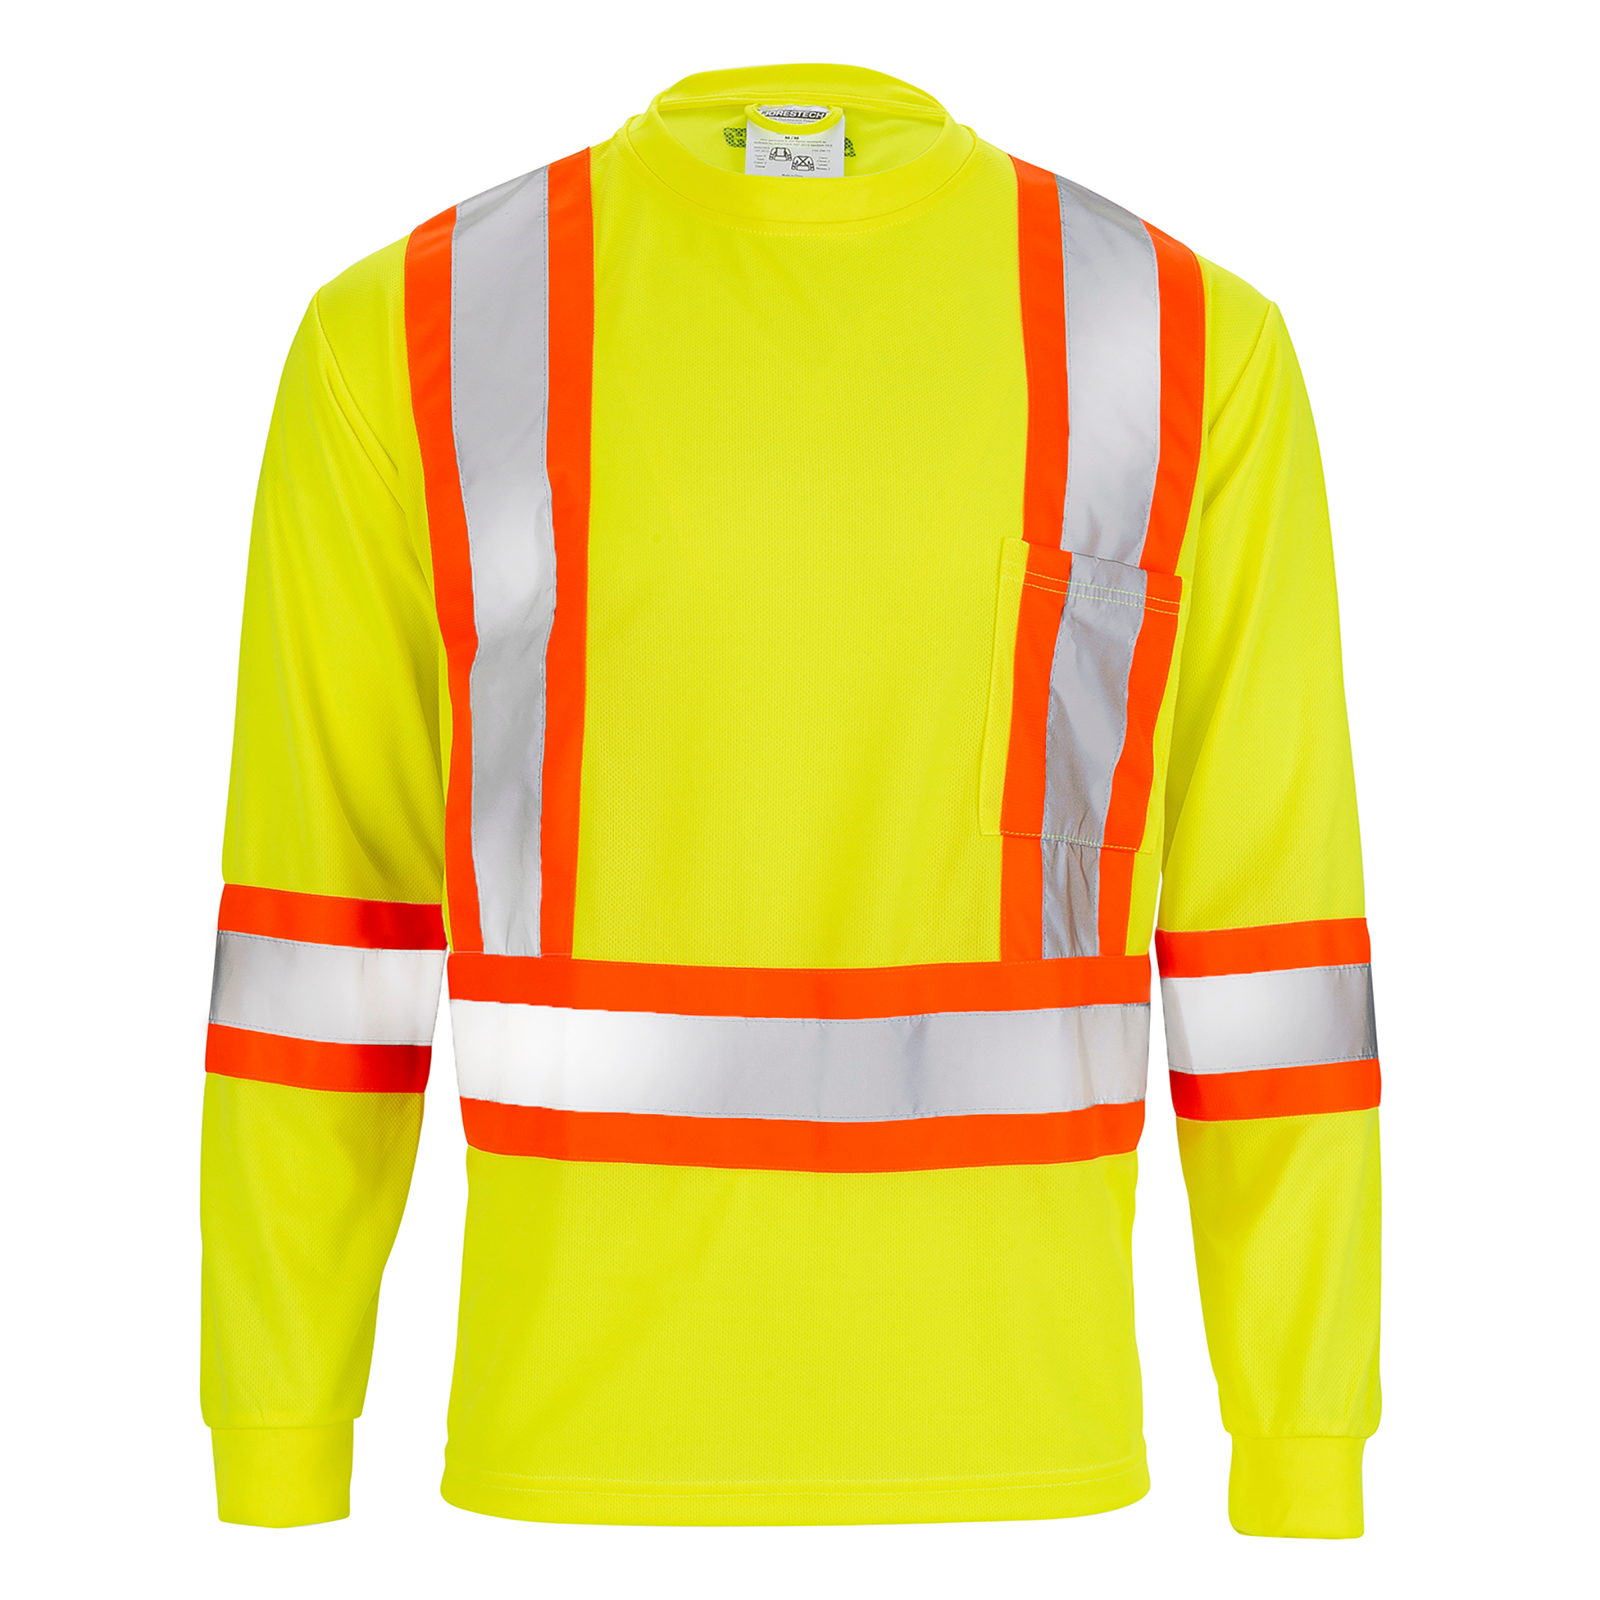 Long sleeve yellow safety shirt with reflective strips